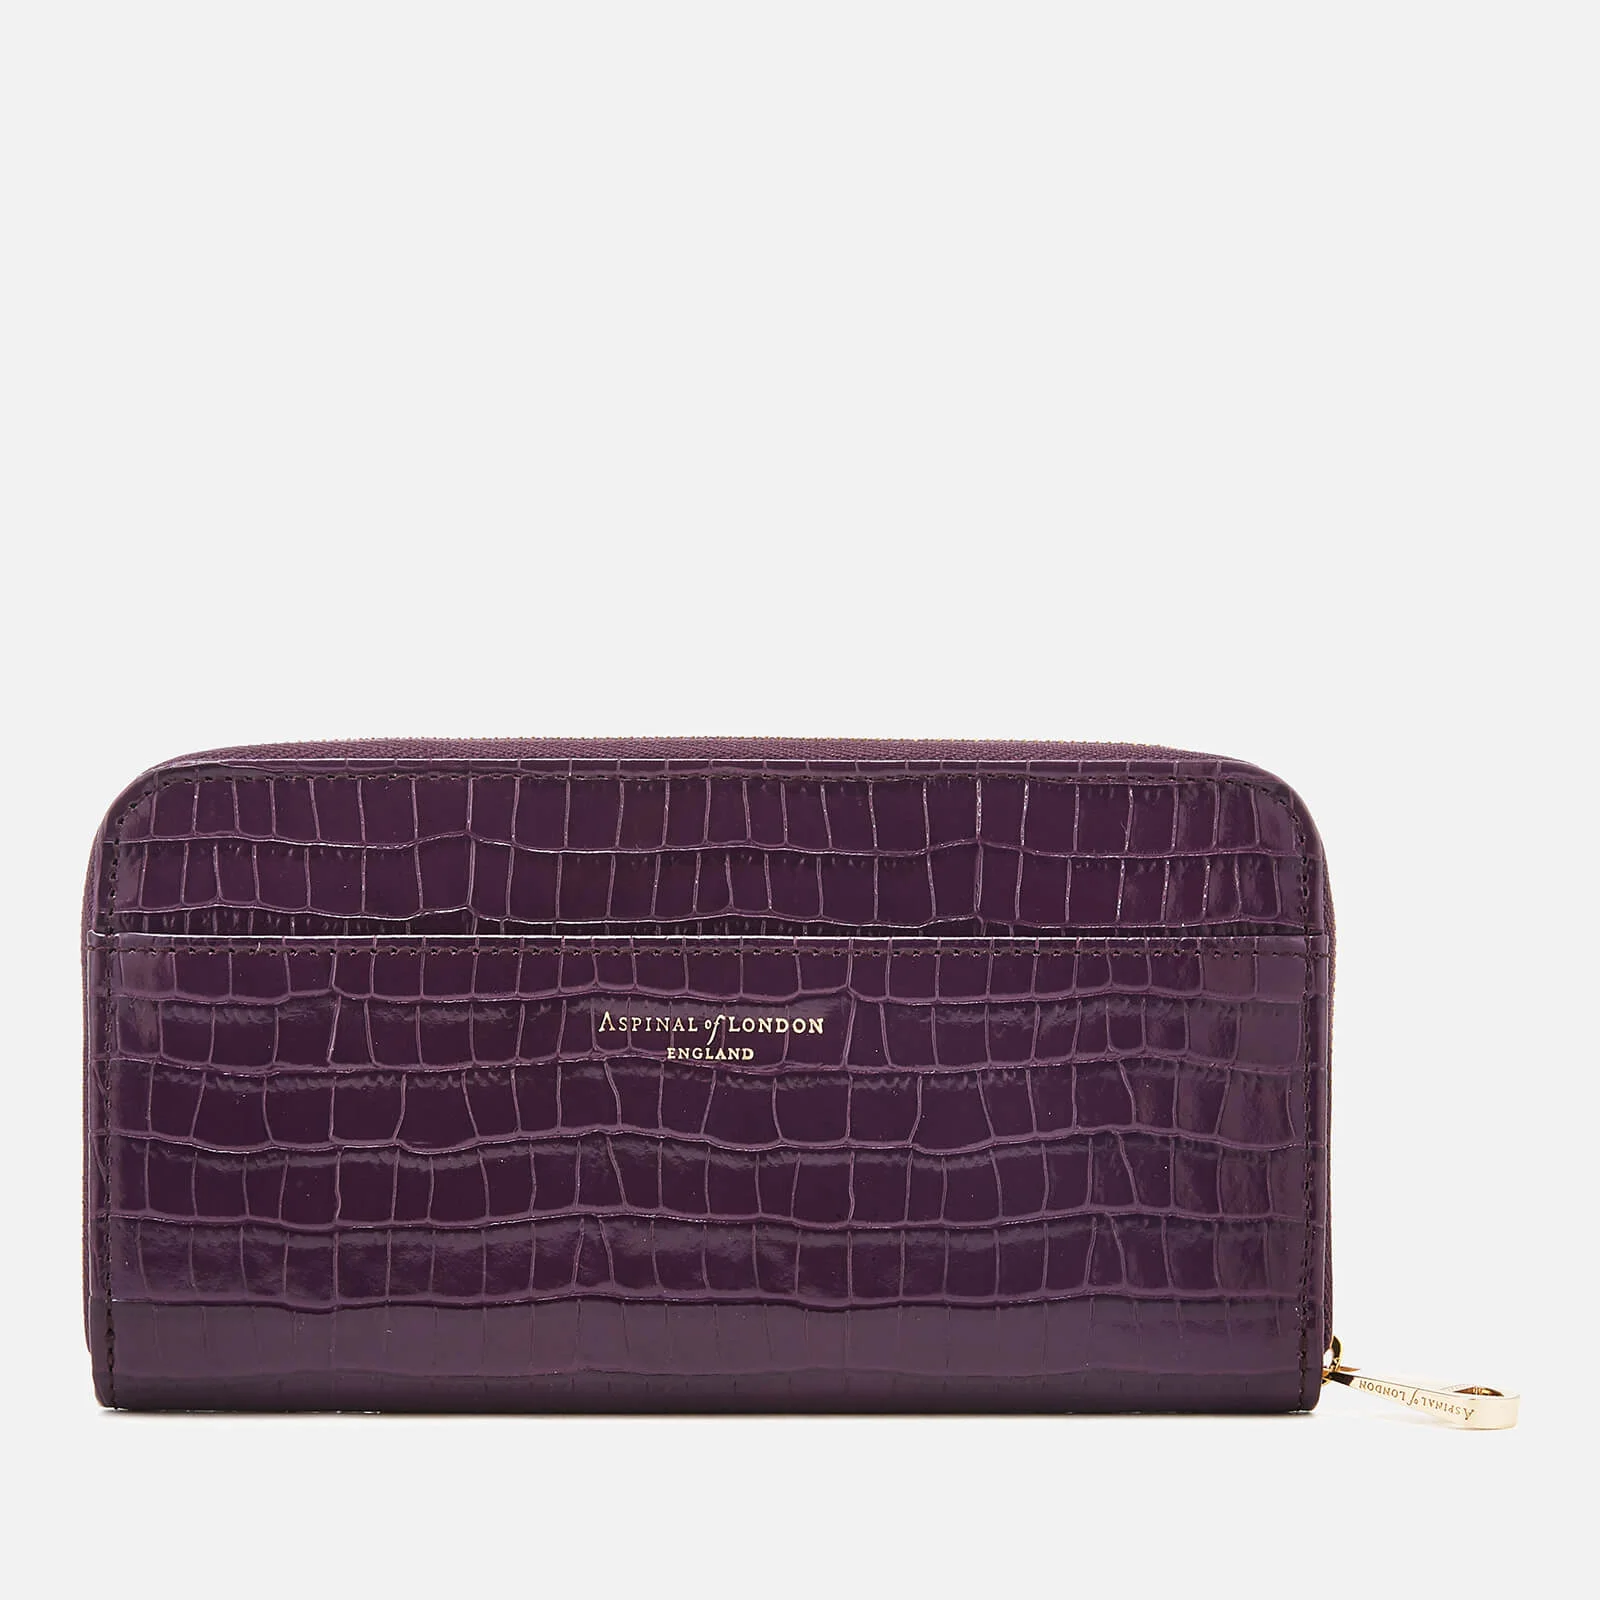 Aspinal of London Women's Continental Clutch Wallet - Amethyst Image 1